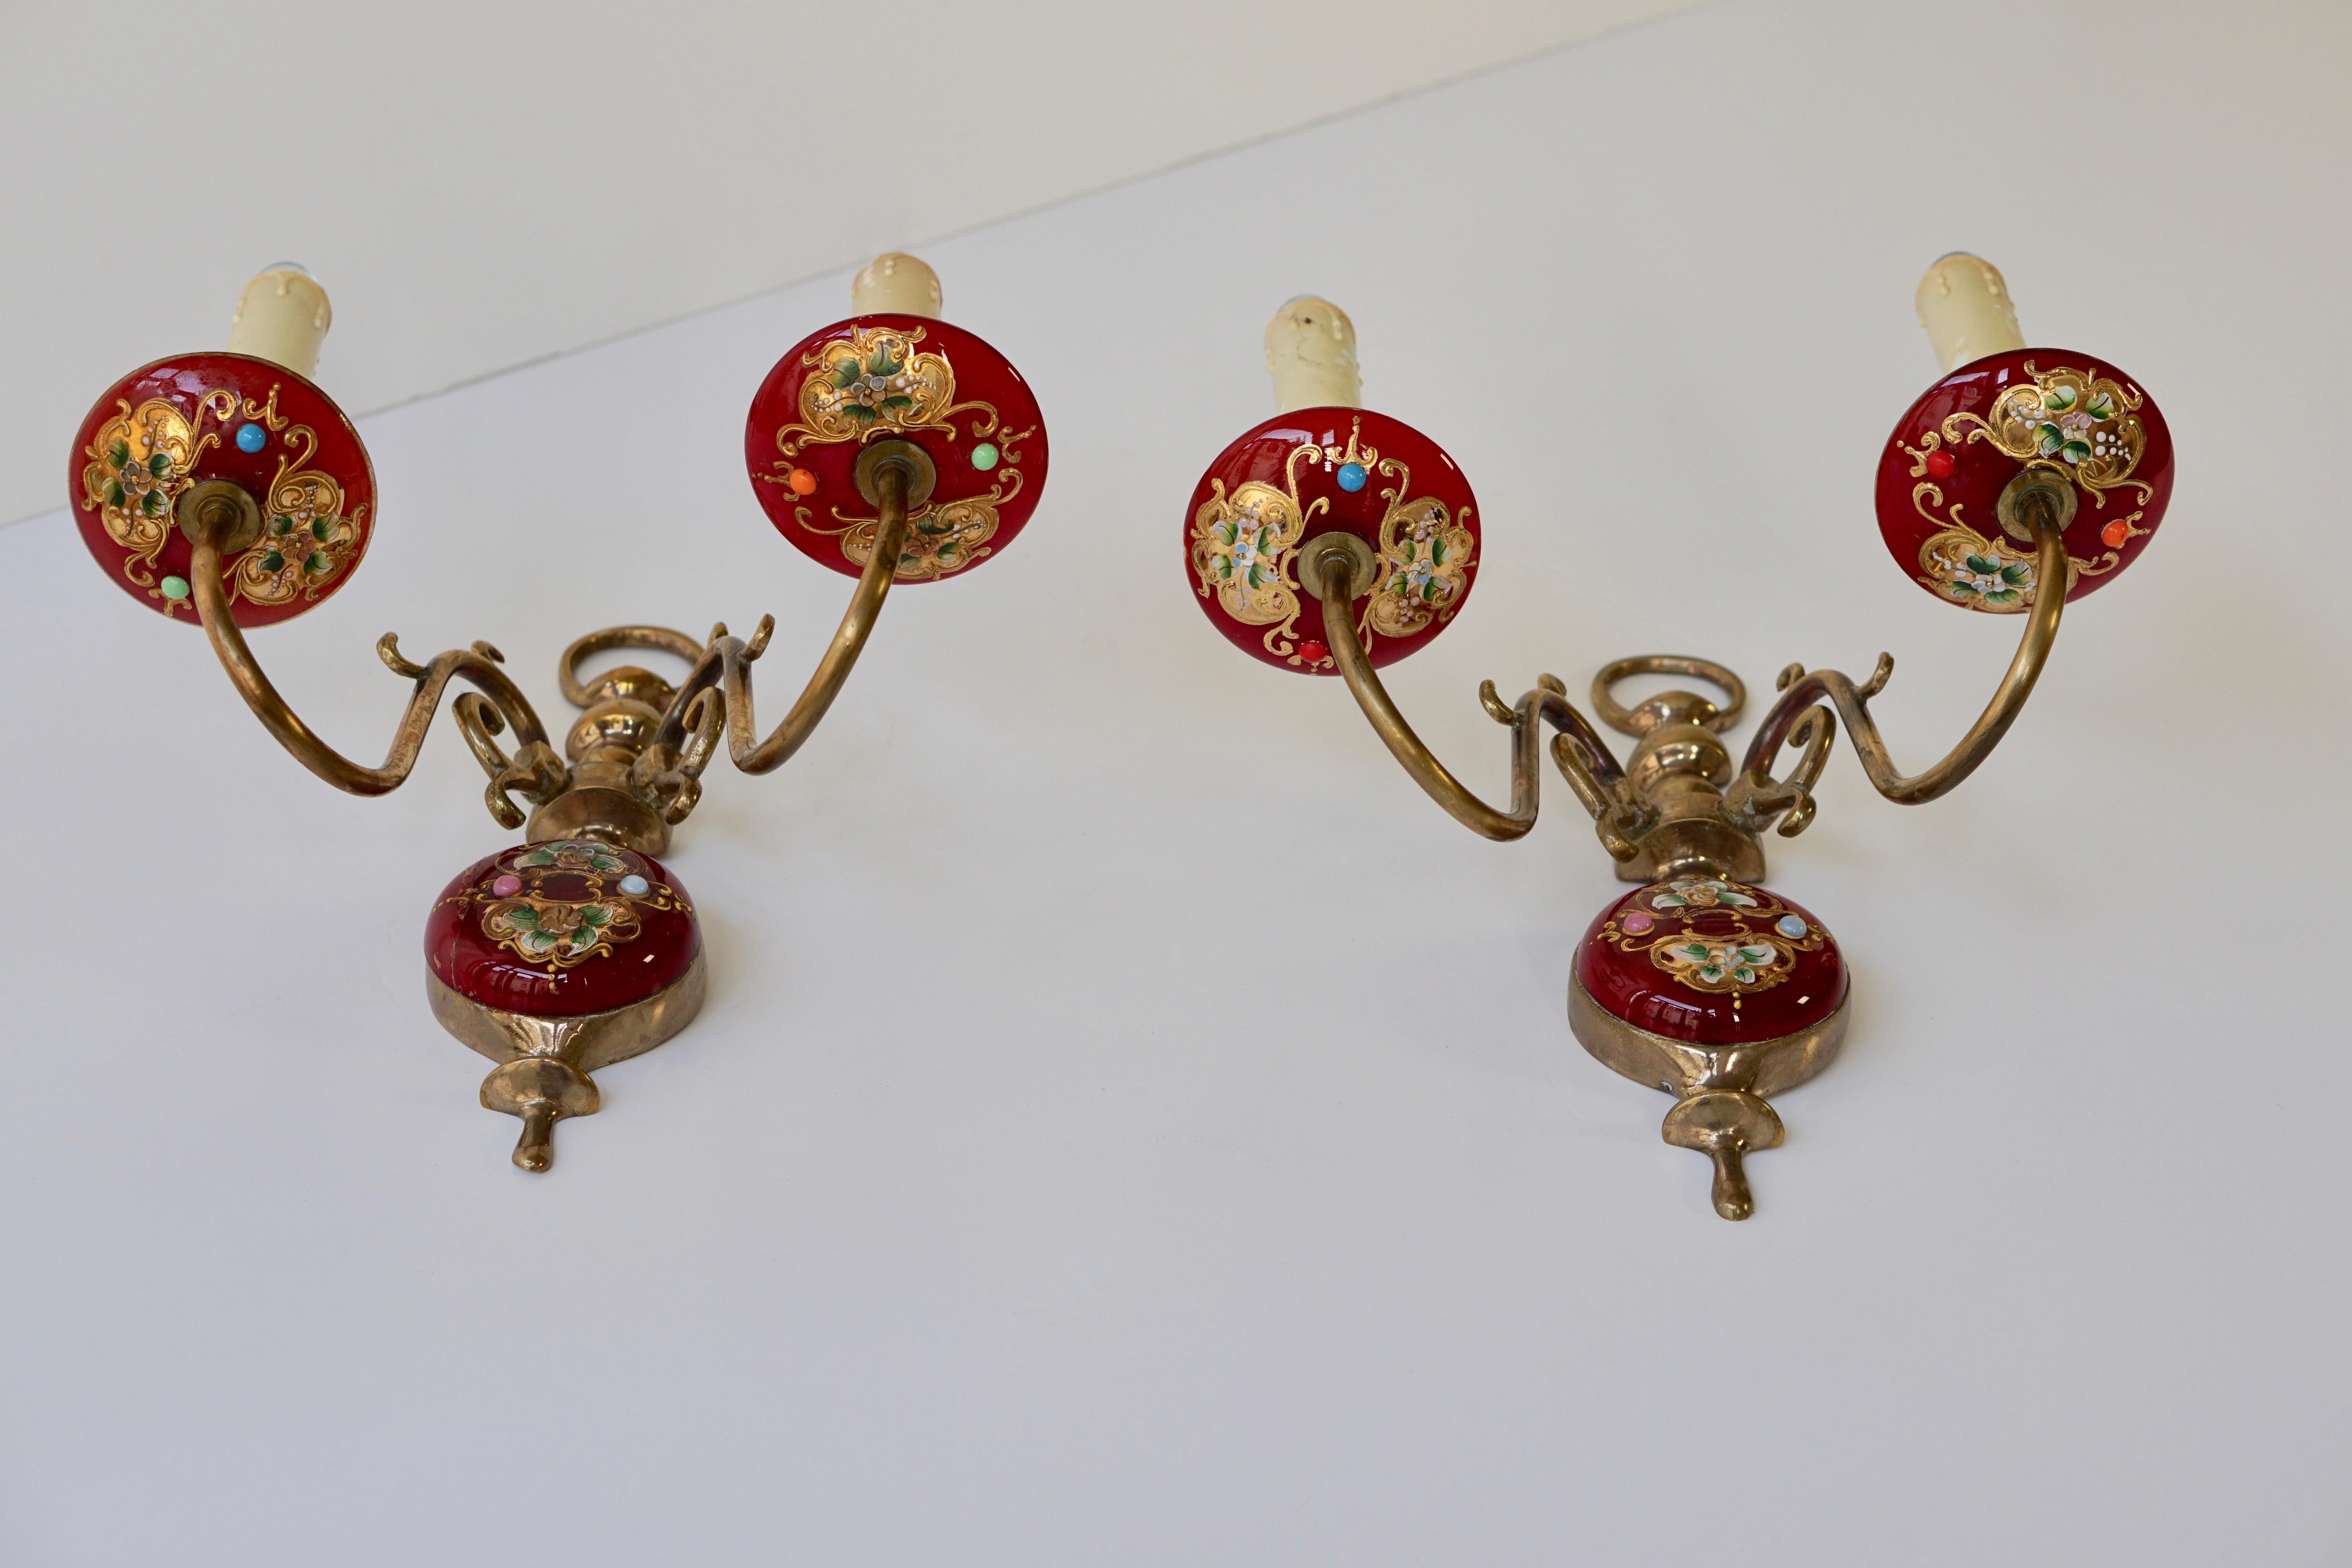 Amazing pair of wall lights with hand blown glass and decorative flowers with brass hardware.
Single based E27 socket per sconce.
Measures: Height 29 cm.
Width 27 cm.

 